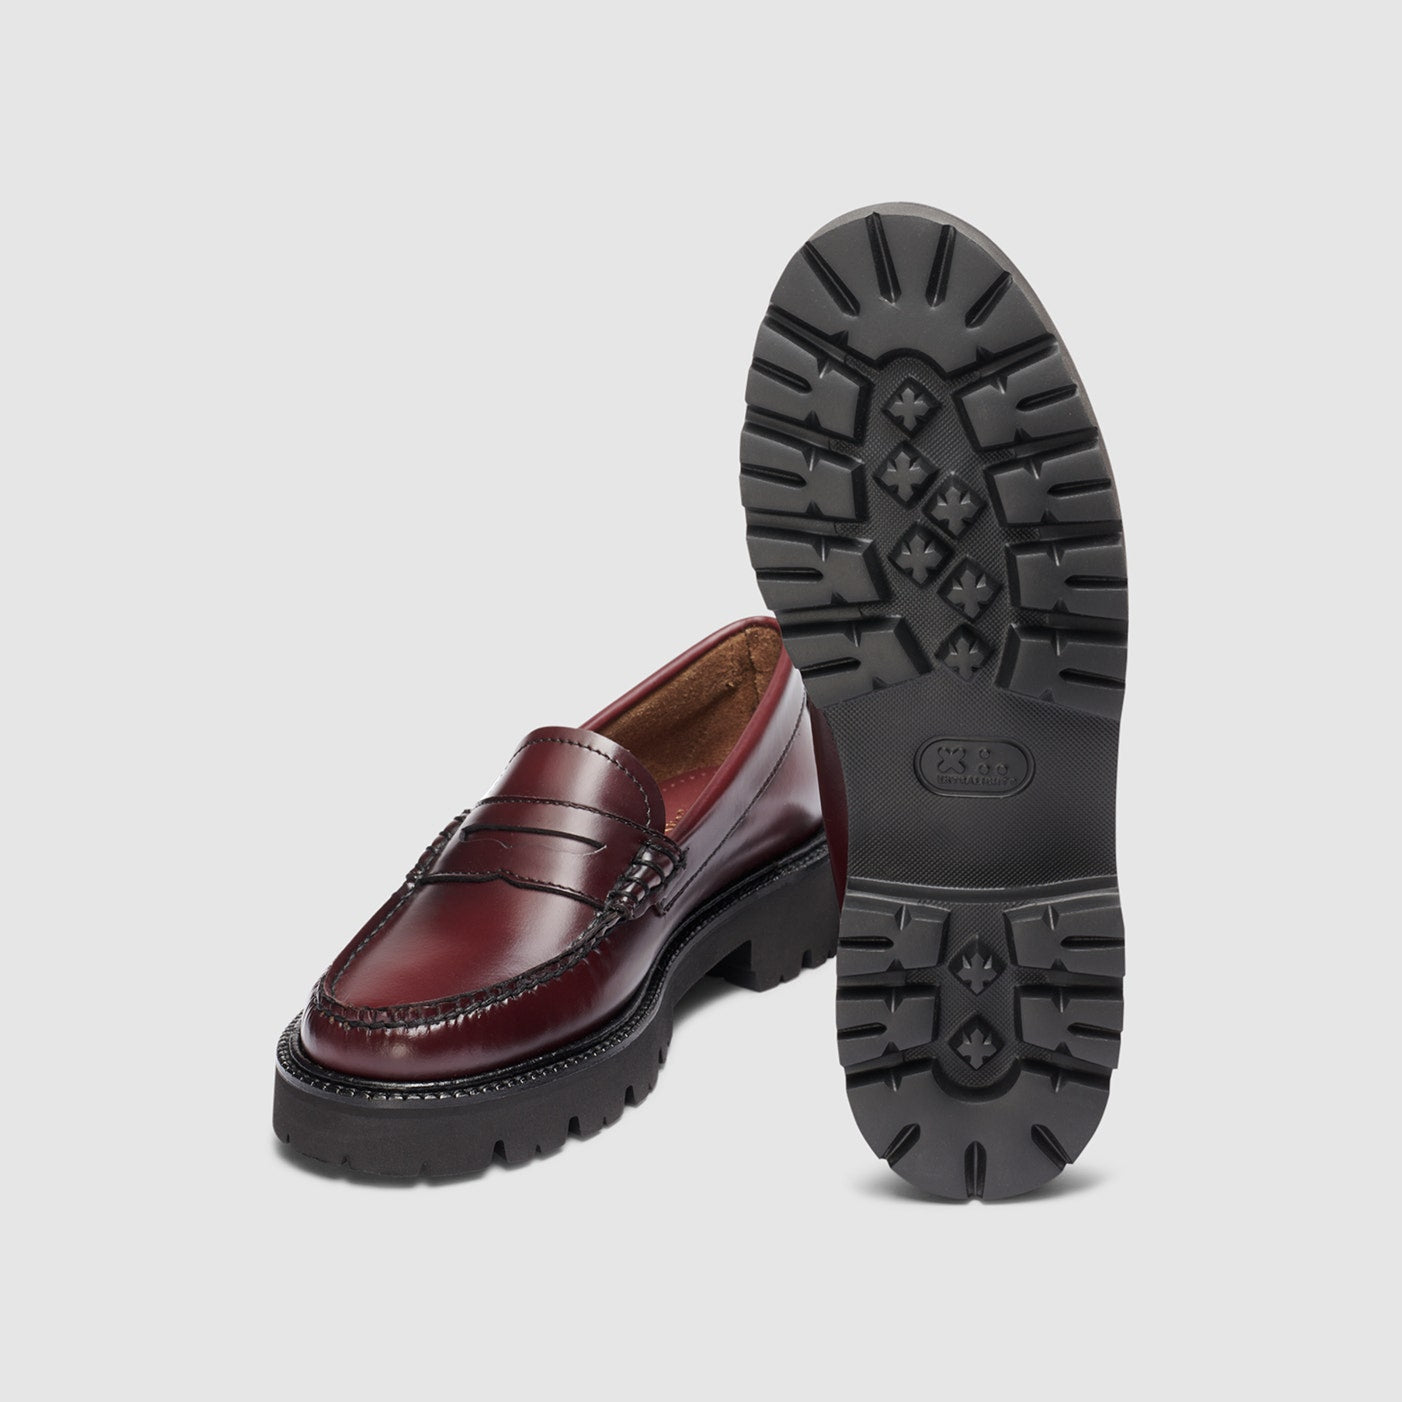 G.H Bass Whitney Super Lug Weejuns Loafer in Wine BAX1W010 | Shop from eightywingold an official brand partner for G.H. Bass in Canada and US.